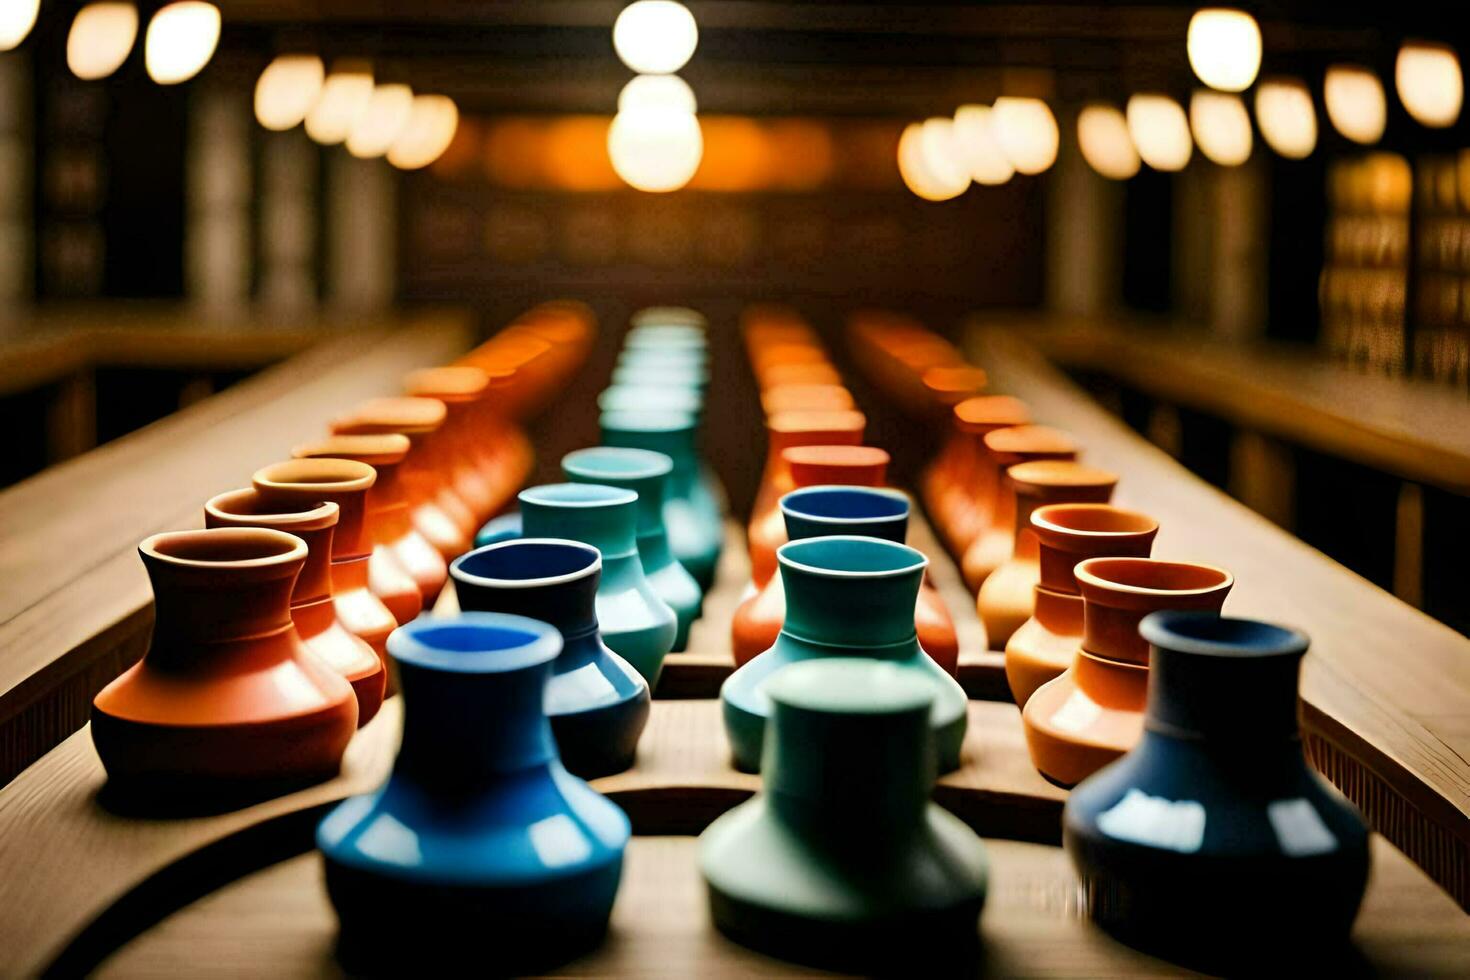 a row of colorful vases on a wooden table. AI-Generated photo